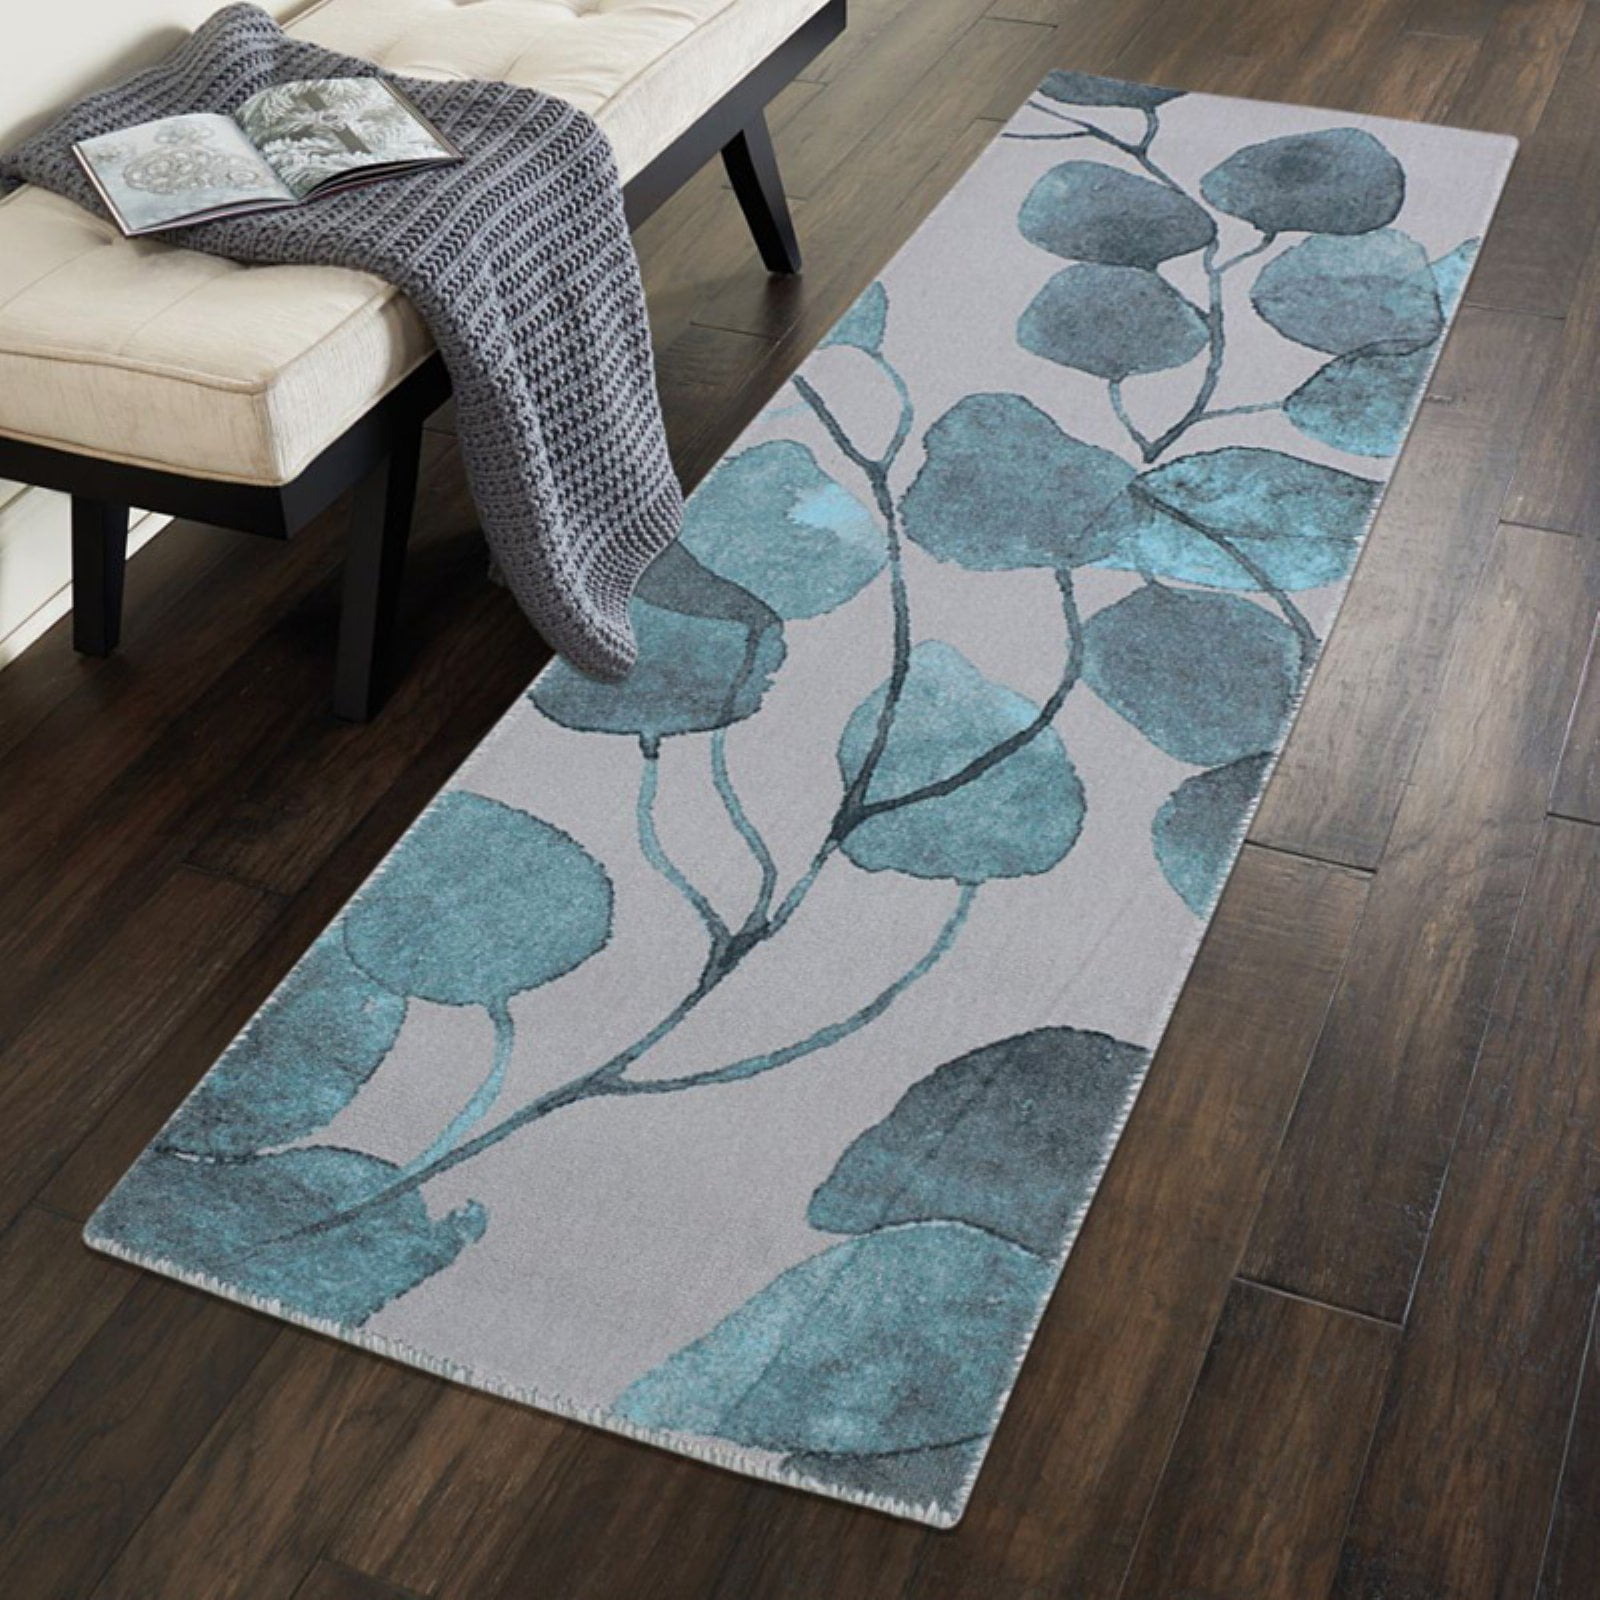 RugSmith Turquoise Ficus Modern Floral Runner Rug, 2' x 6'